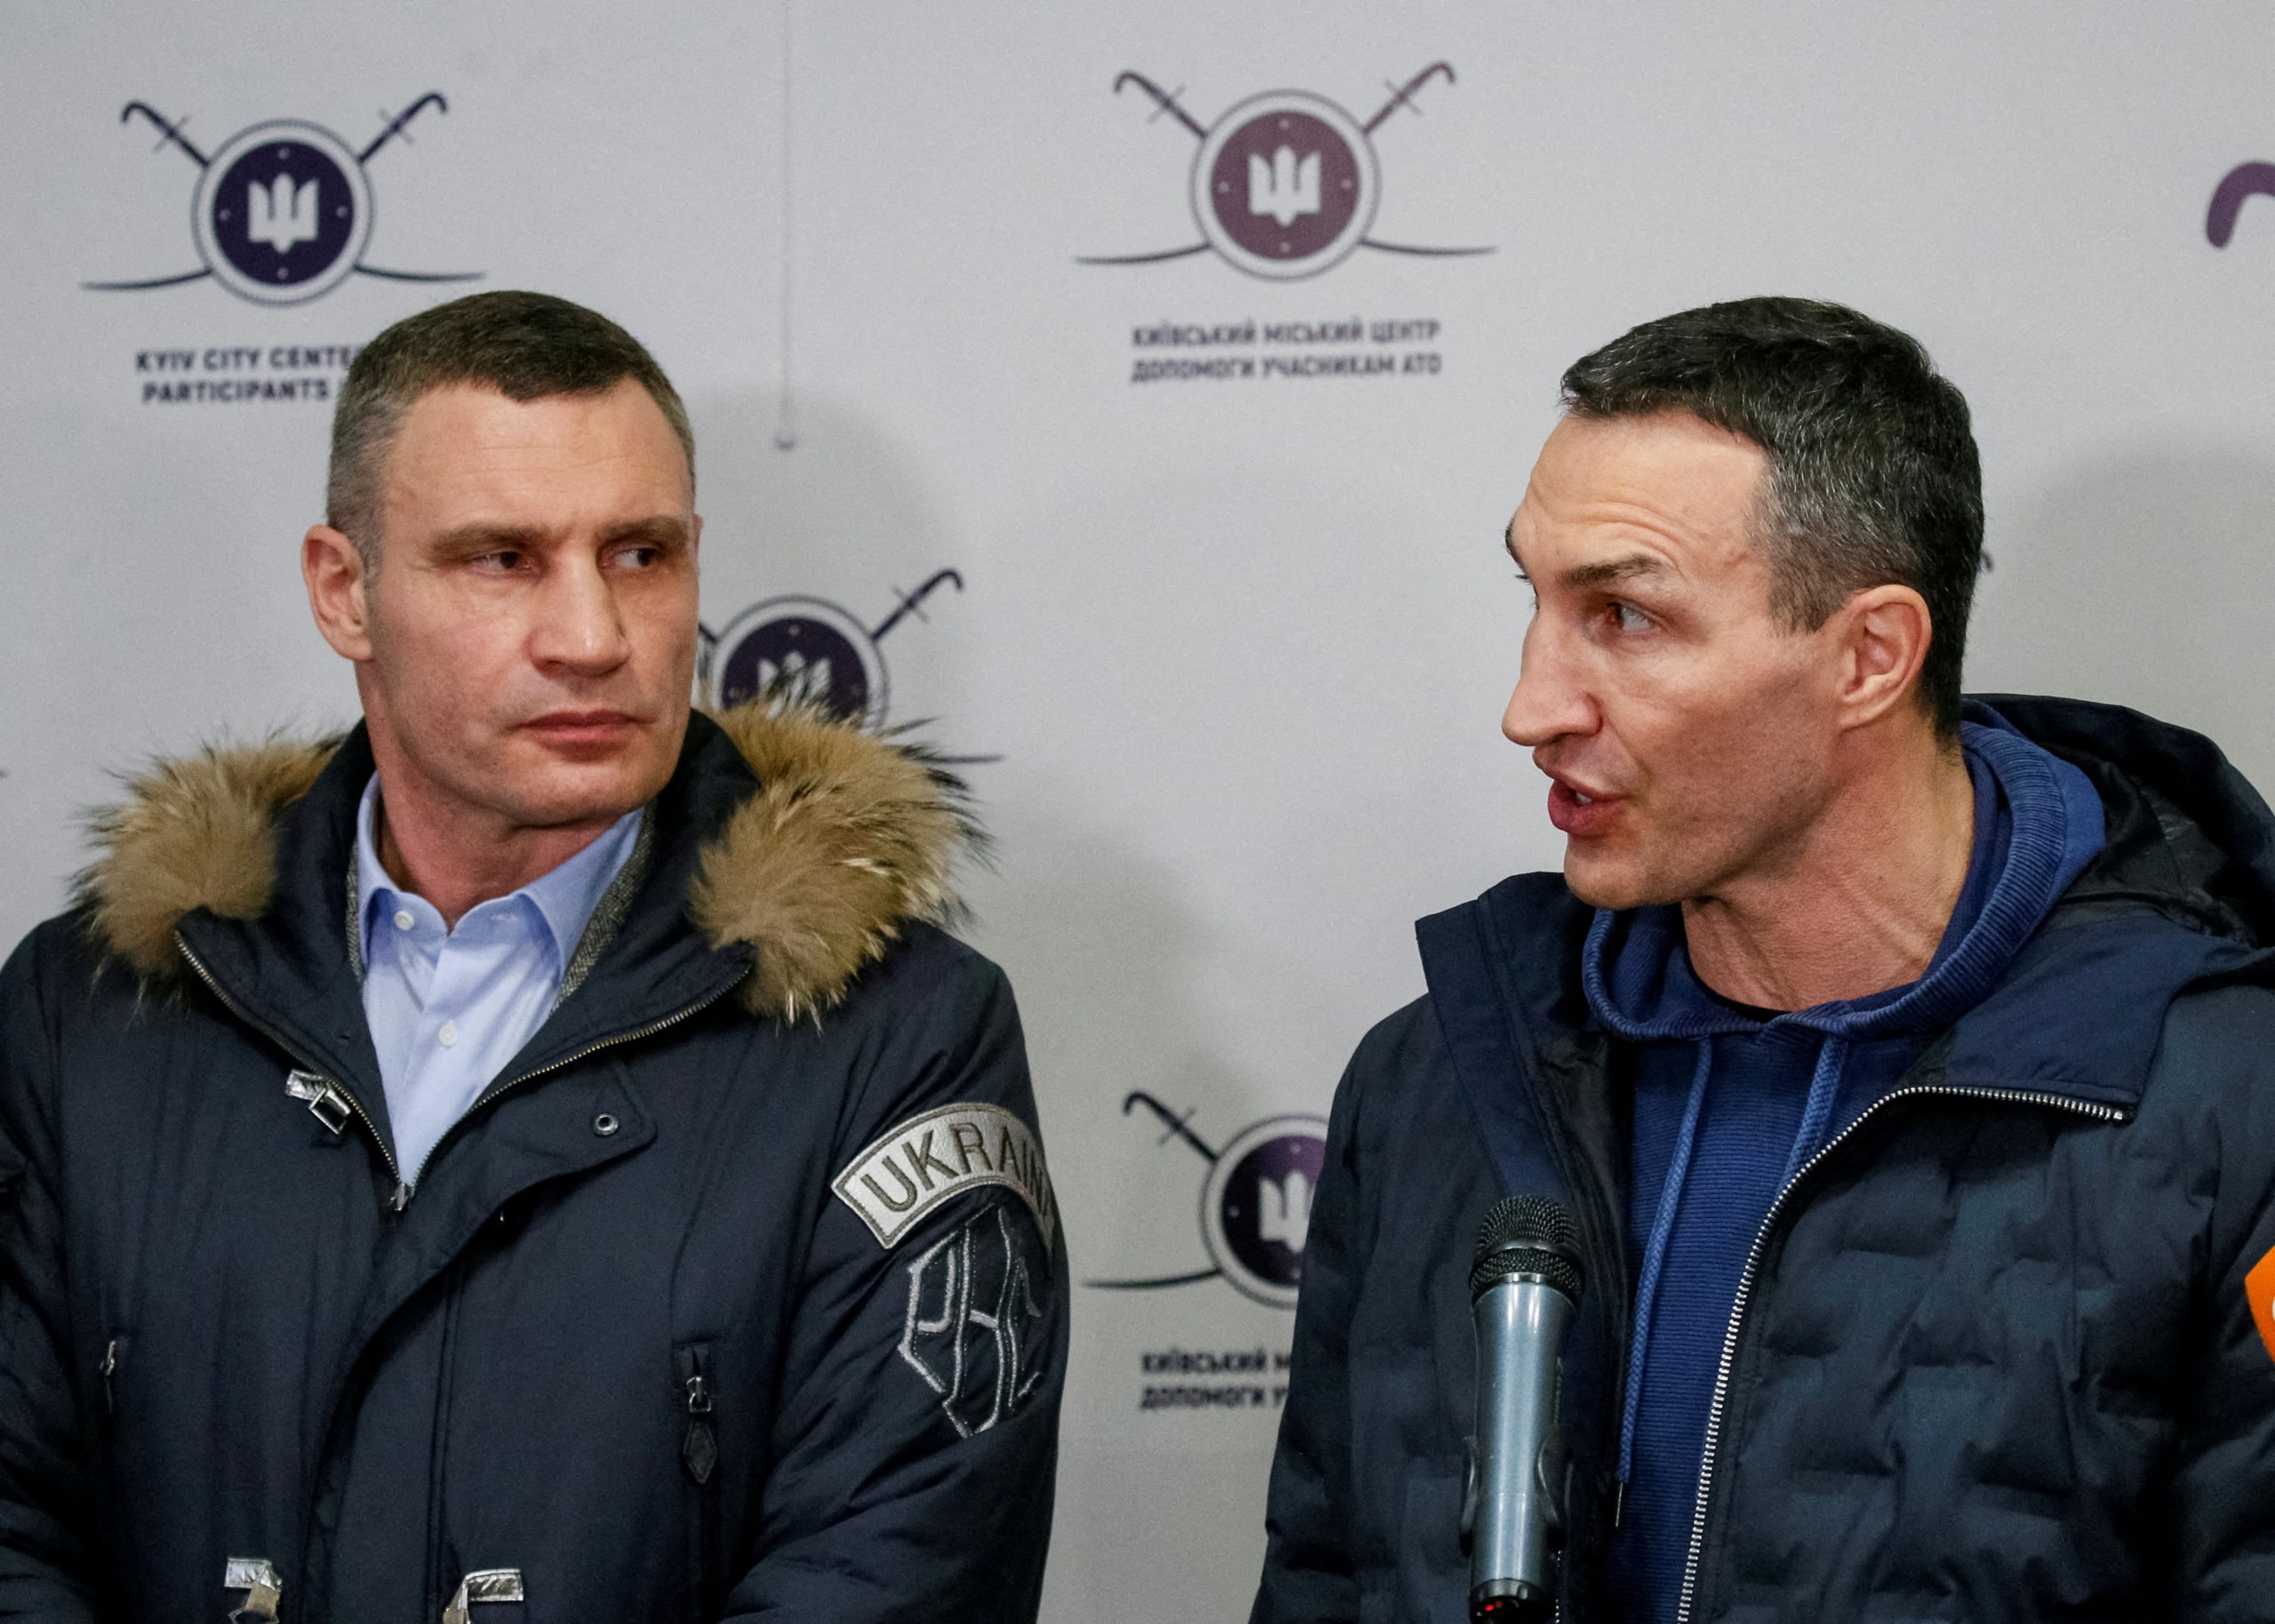 FILE PHOTO: Ukrainian heavyweight boxing world champion Wladimir Klitschko who joined the Ukrainian Territorial Defence Forces and his brother, Mayor of Kyiv and former heavyweight boxing champion Vitaly Klitschko, speak with journalists during the opening of the first Ukrainian Territorial Defence Forces recruitment centre in central Kyiv, Ukraine, February 2, 2022. 